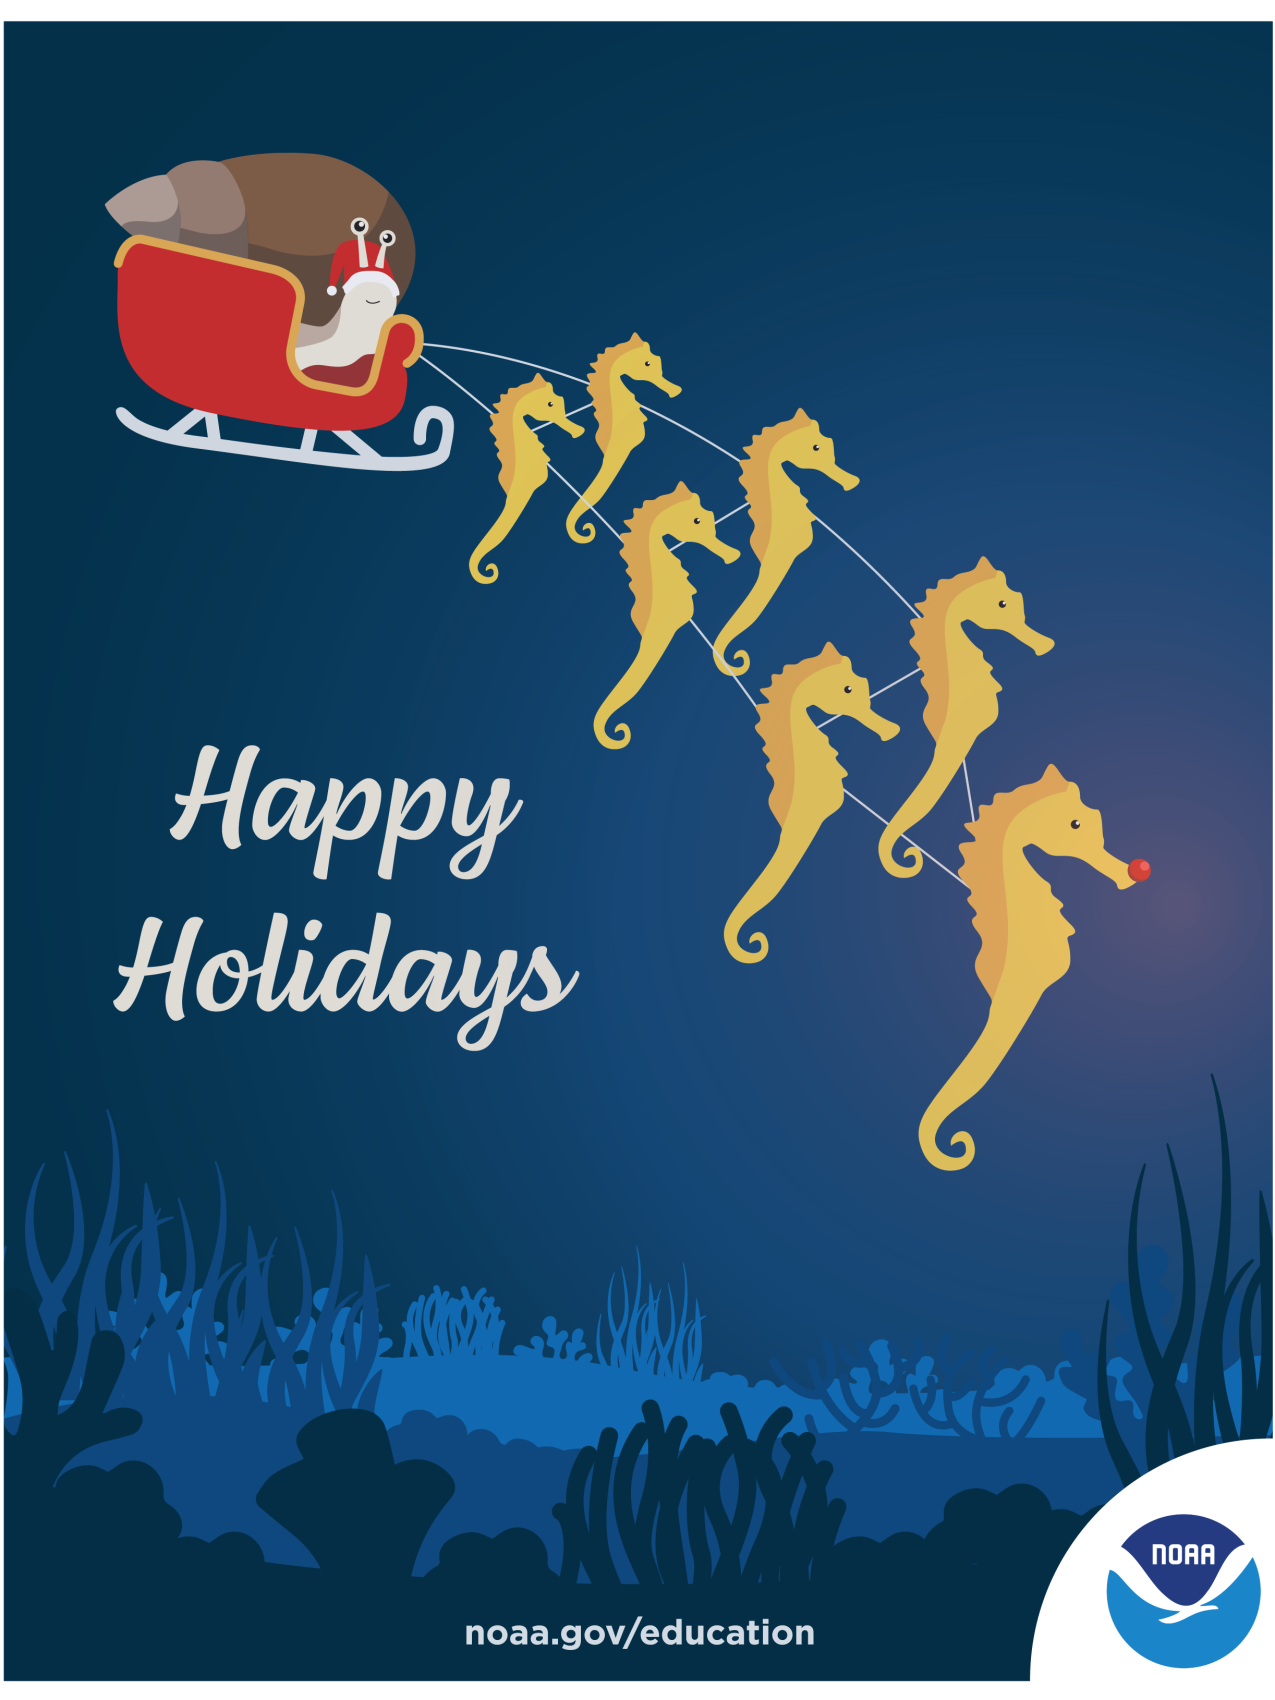 An illustrated holiday card featuring a sleigh with a sea snail in it that is being pulled by several seahorses over a coral reef. The front seahorse has a glowing red nose. There is a NOAA logo in the corner of the card. Text: Happy Holidays. noaa.gov/education